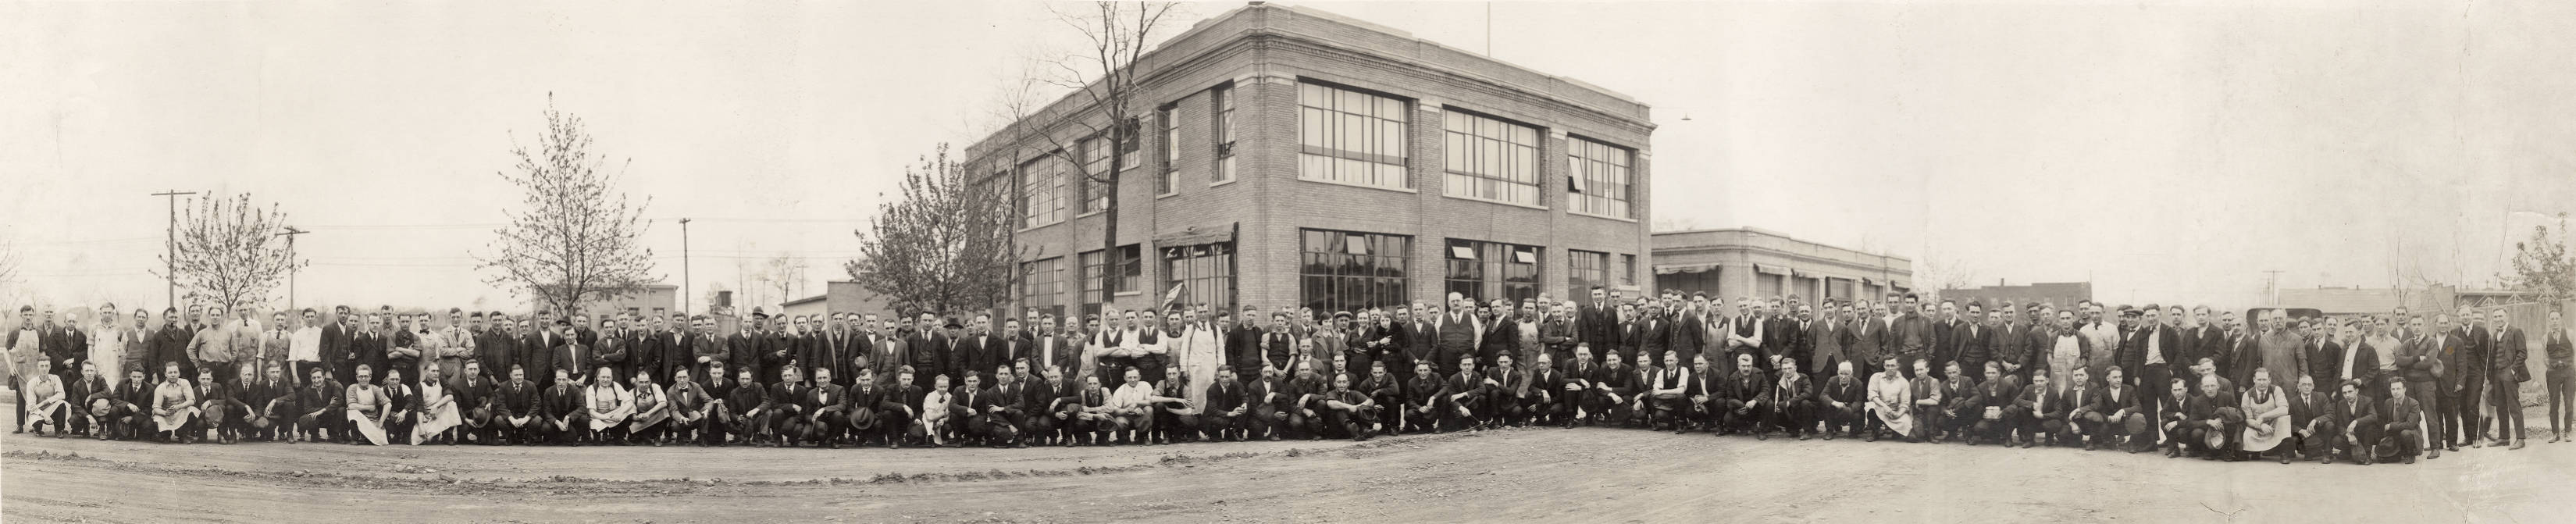 A large group of people pose for a photograph outside of a building.